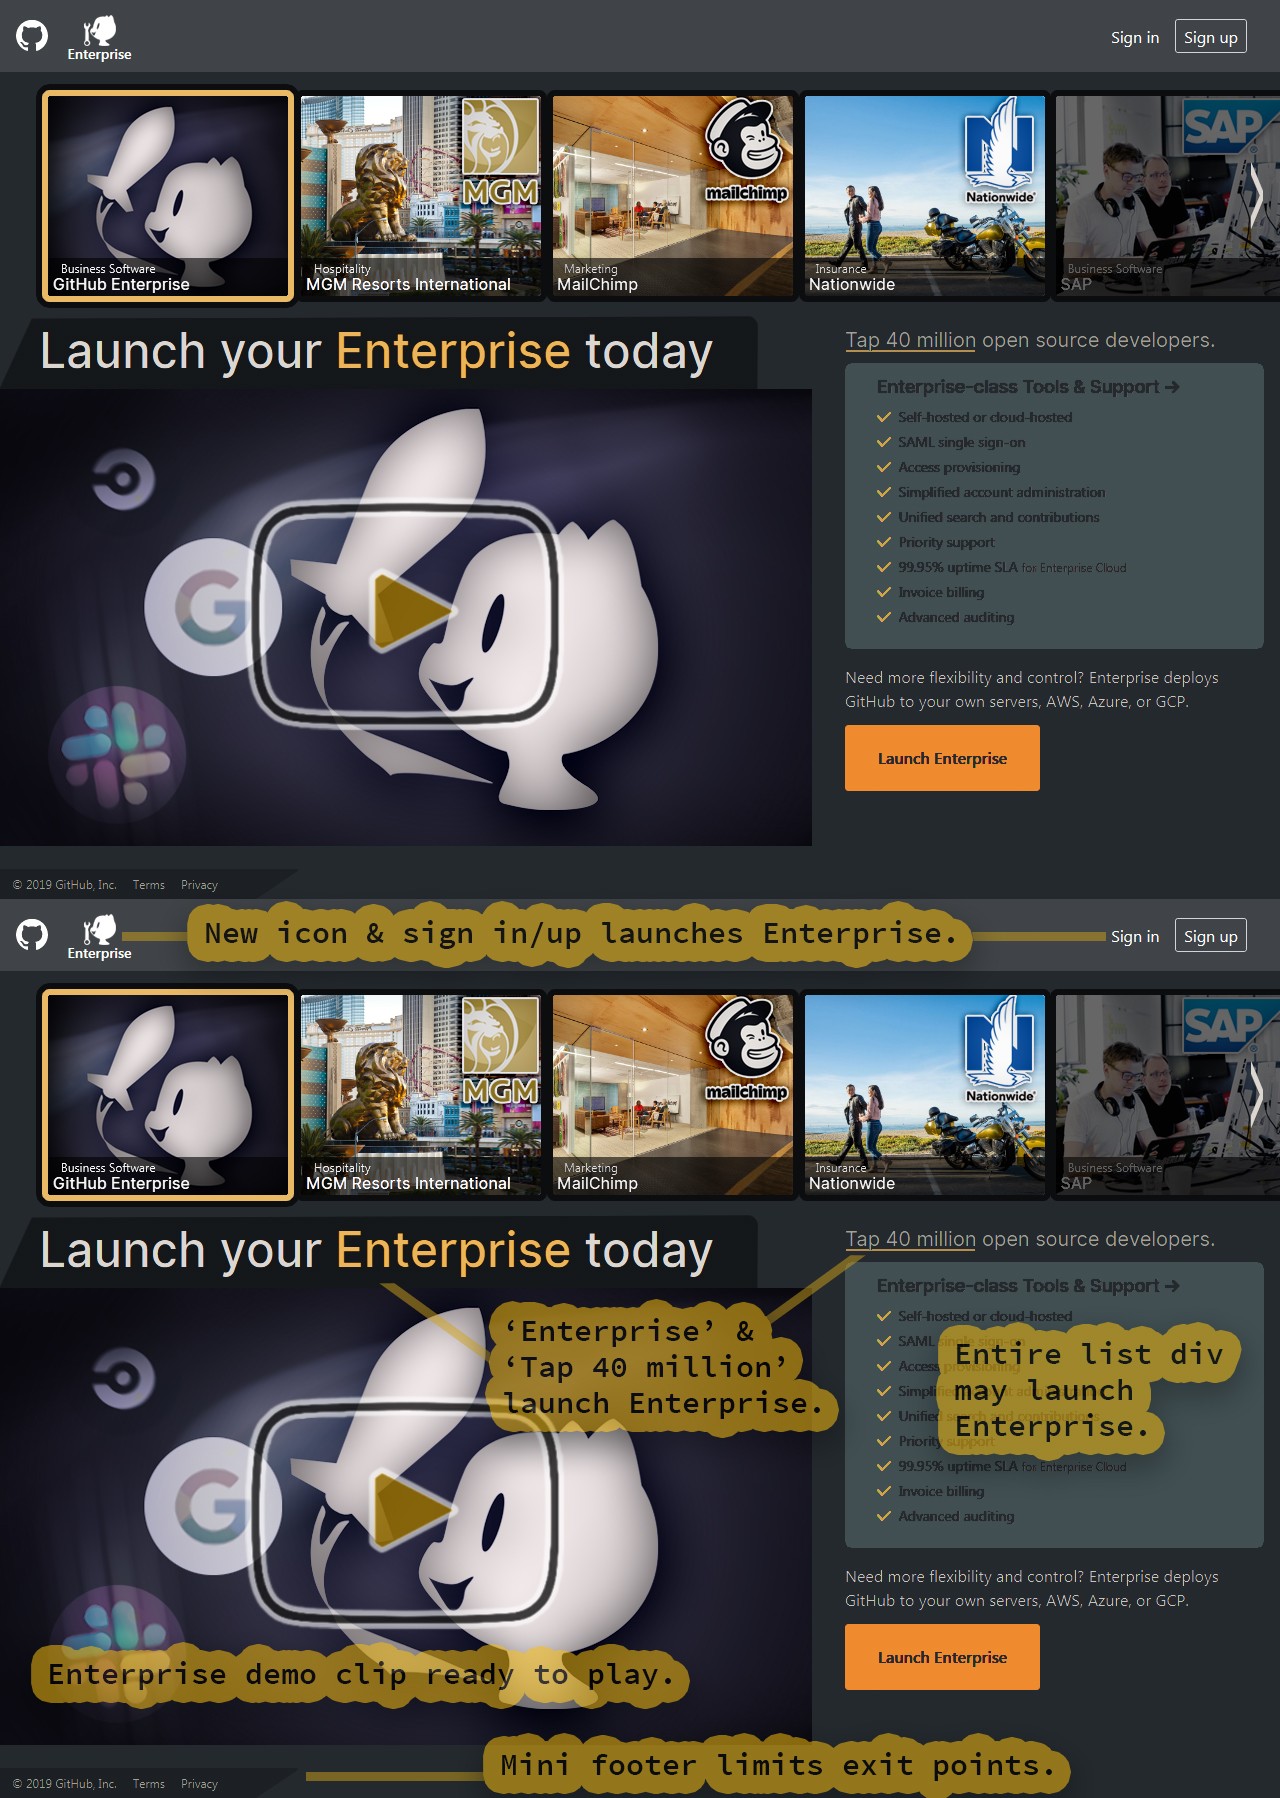 GitHub Enterprise landing page redesigned to be much more compact.